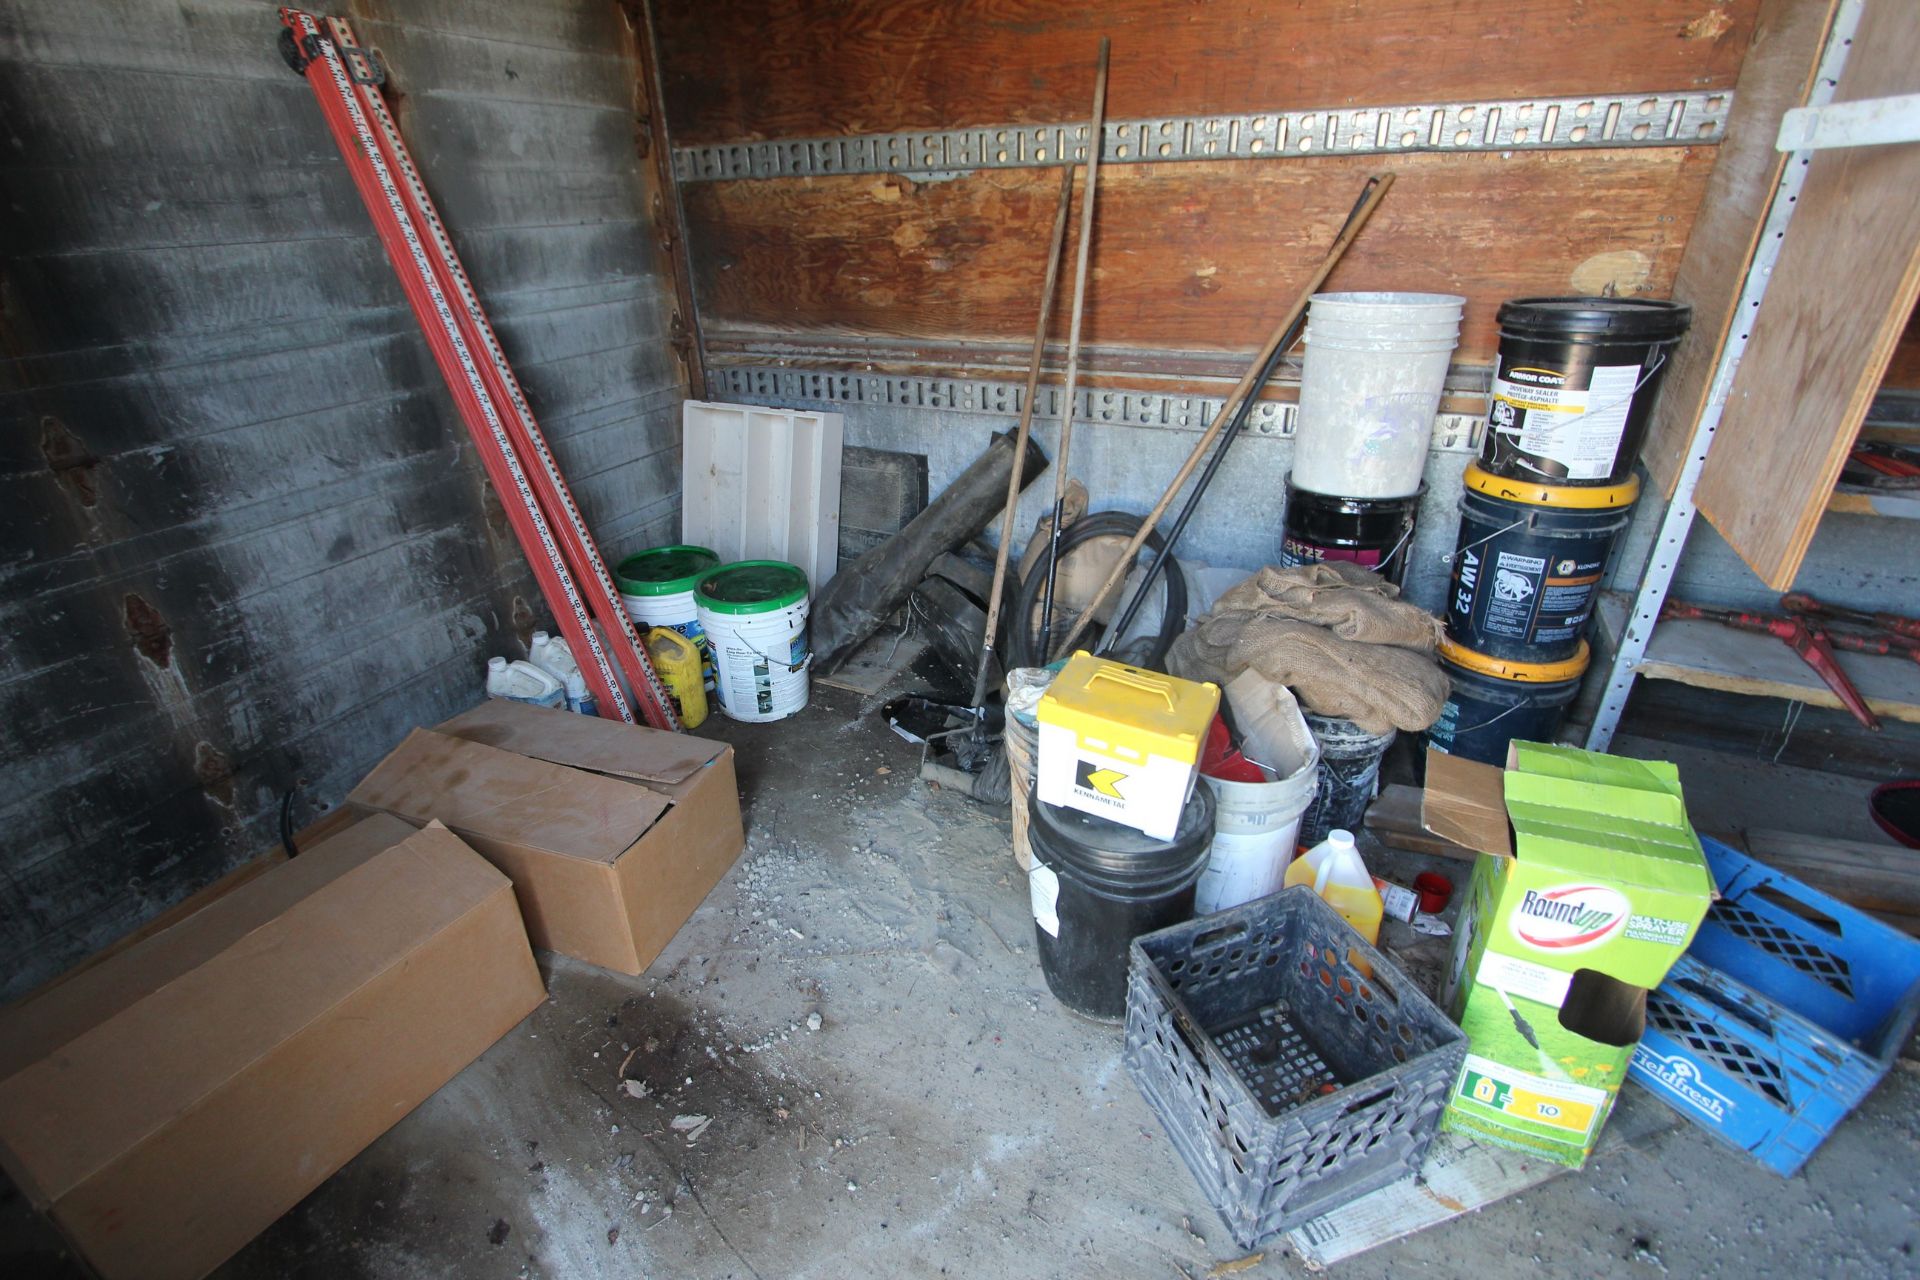 CONTENTS OF TRUCK BOX / STORAGE SHED